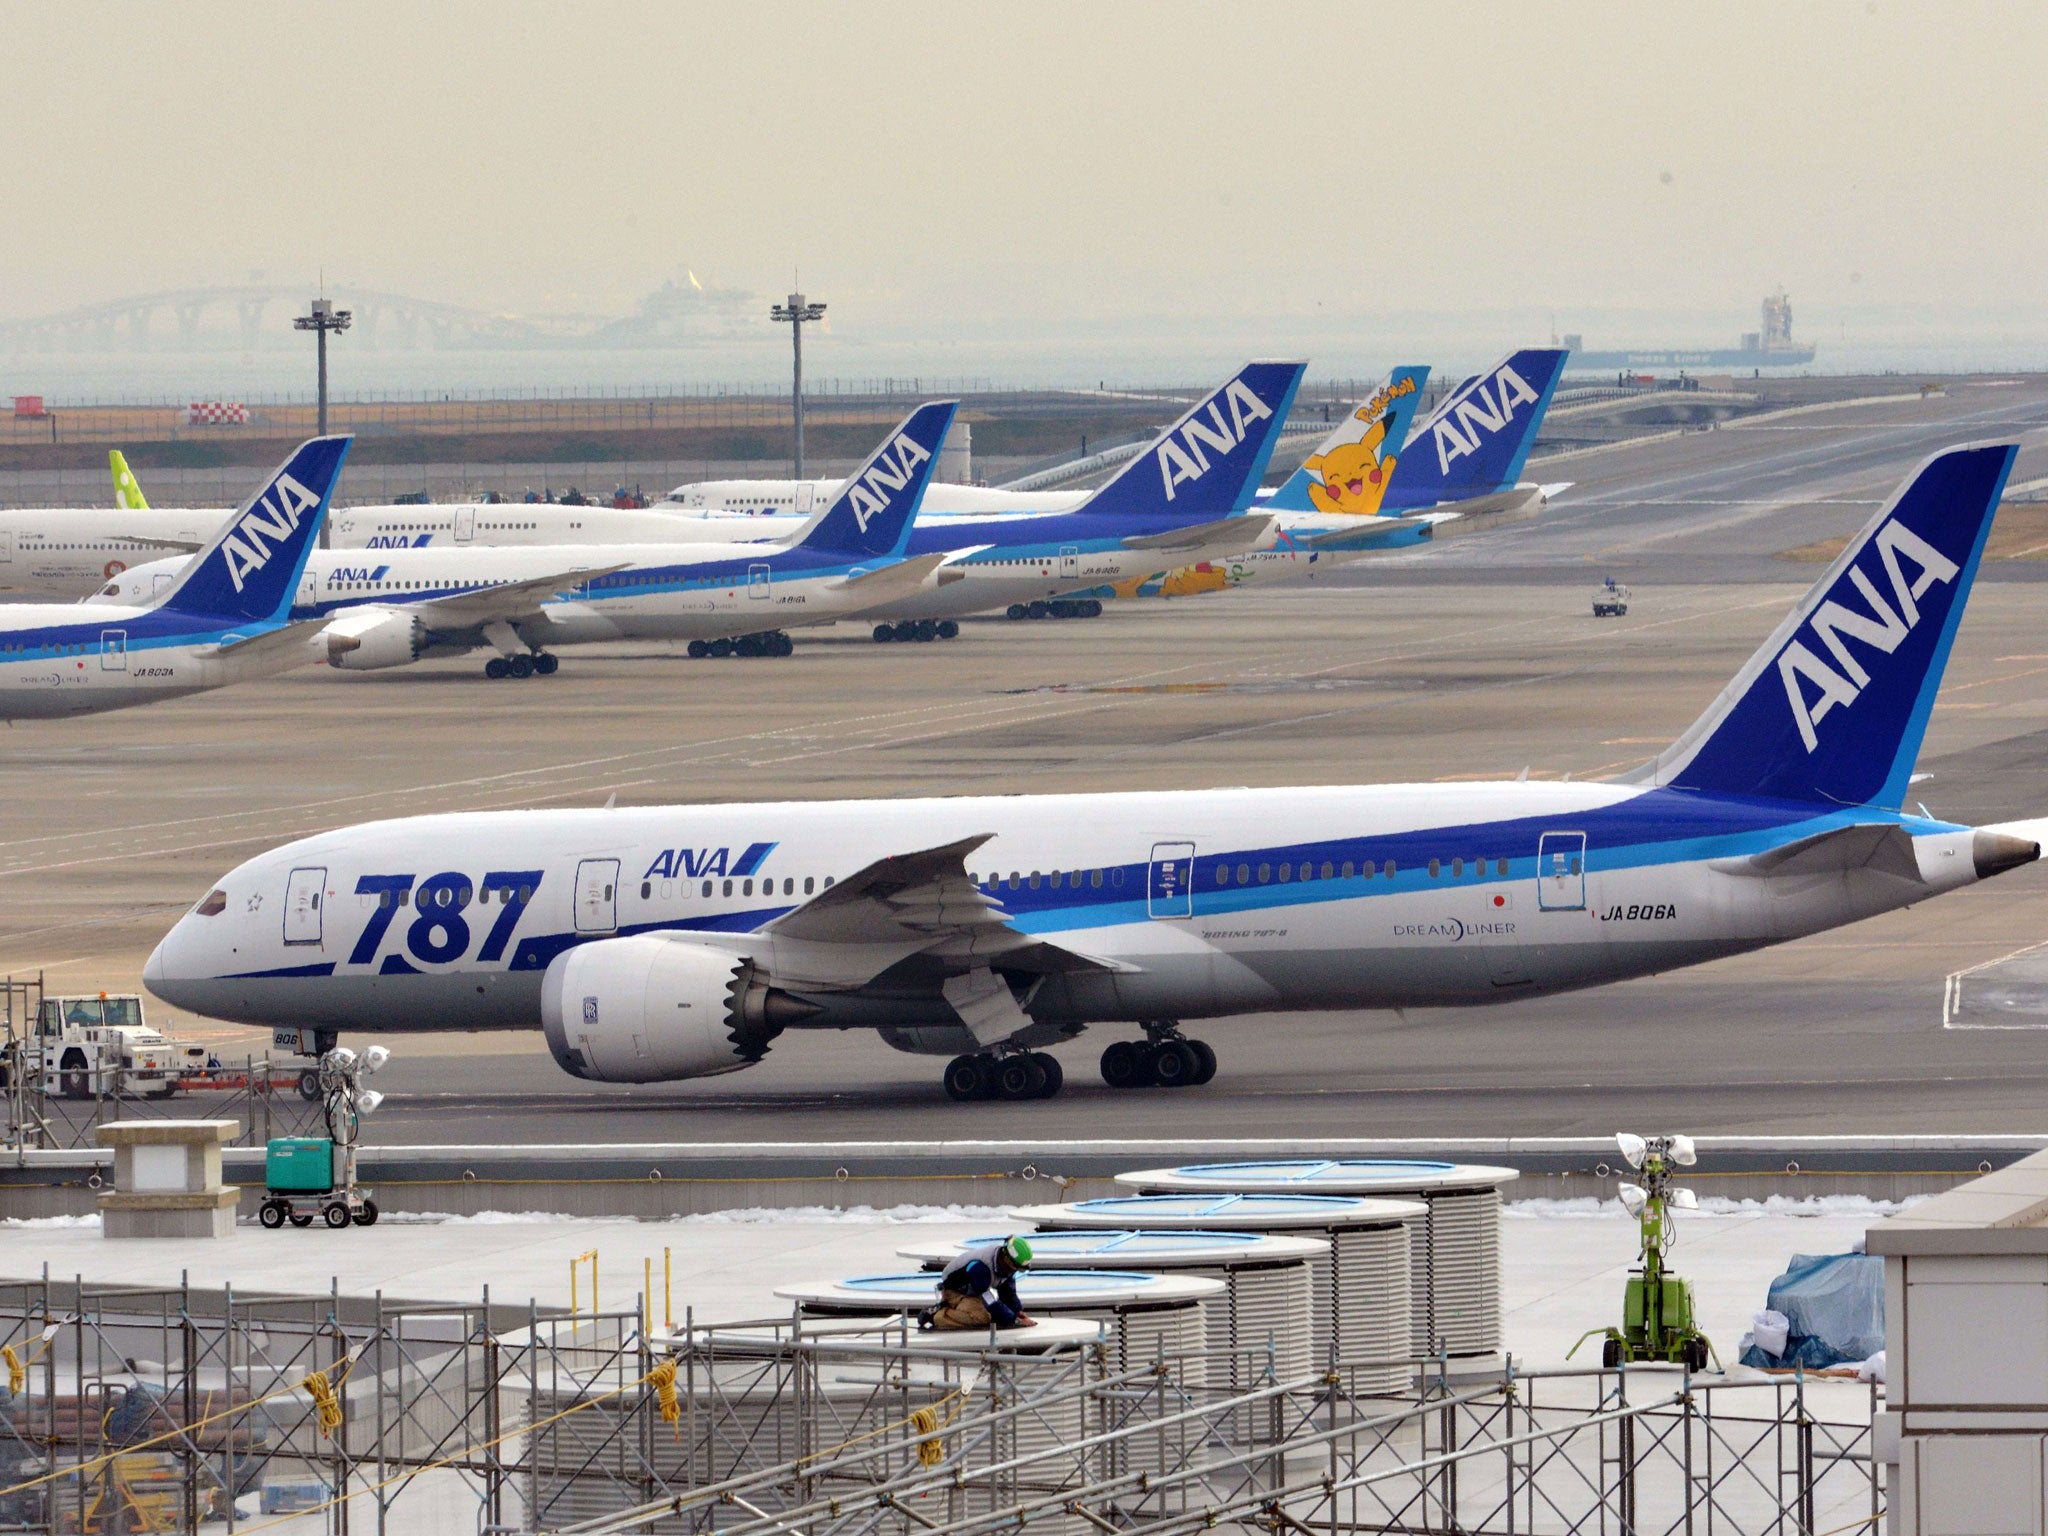 Japan's major airlines have grounded their Boeing 787 planes for safety checks